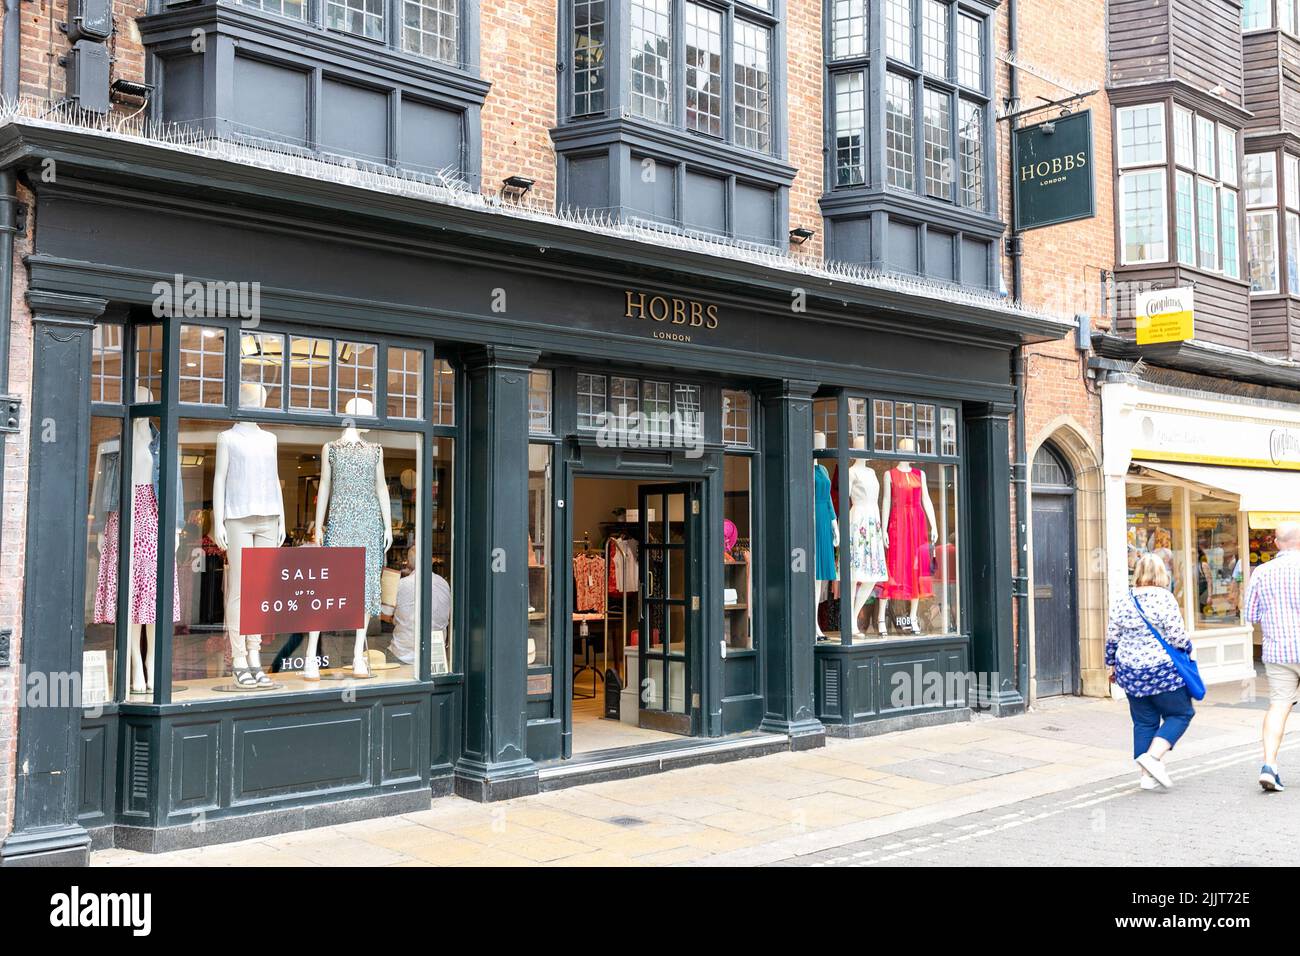 Hobbs clothing store in historic York city centre, exterior of clothing ...